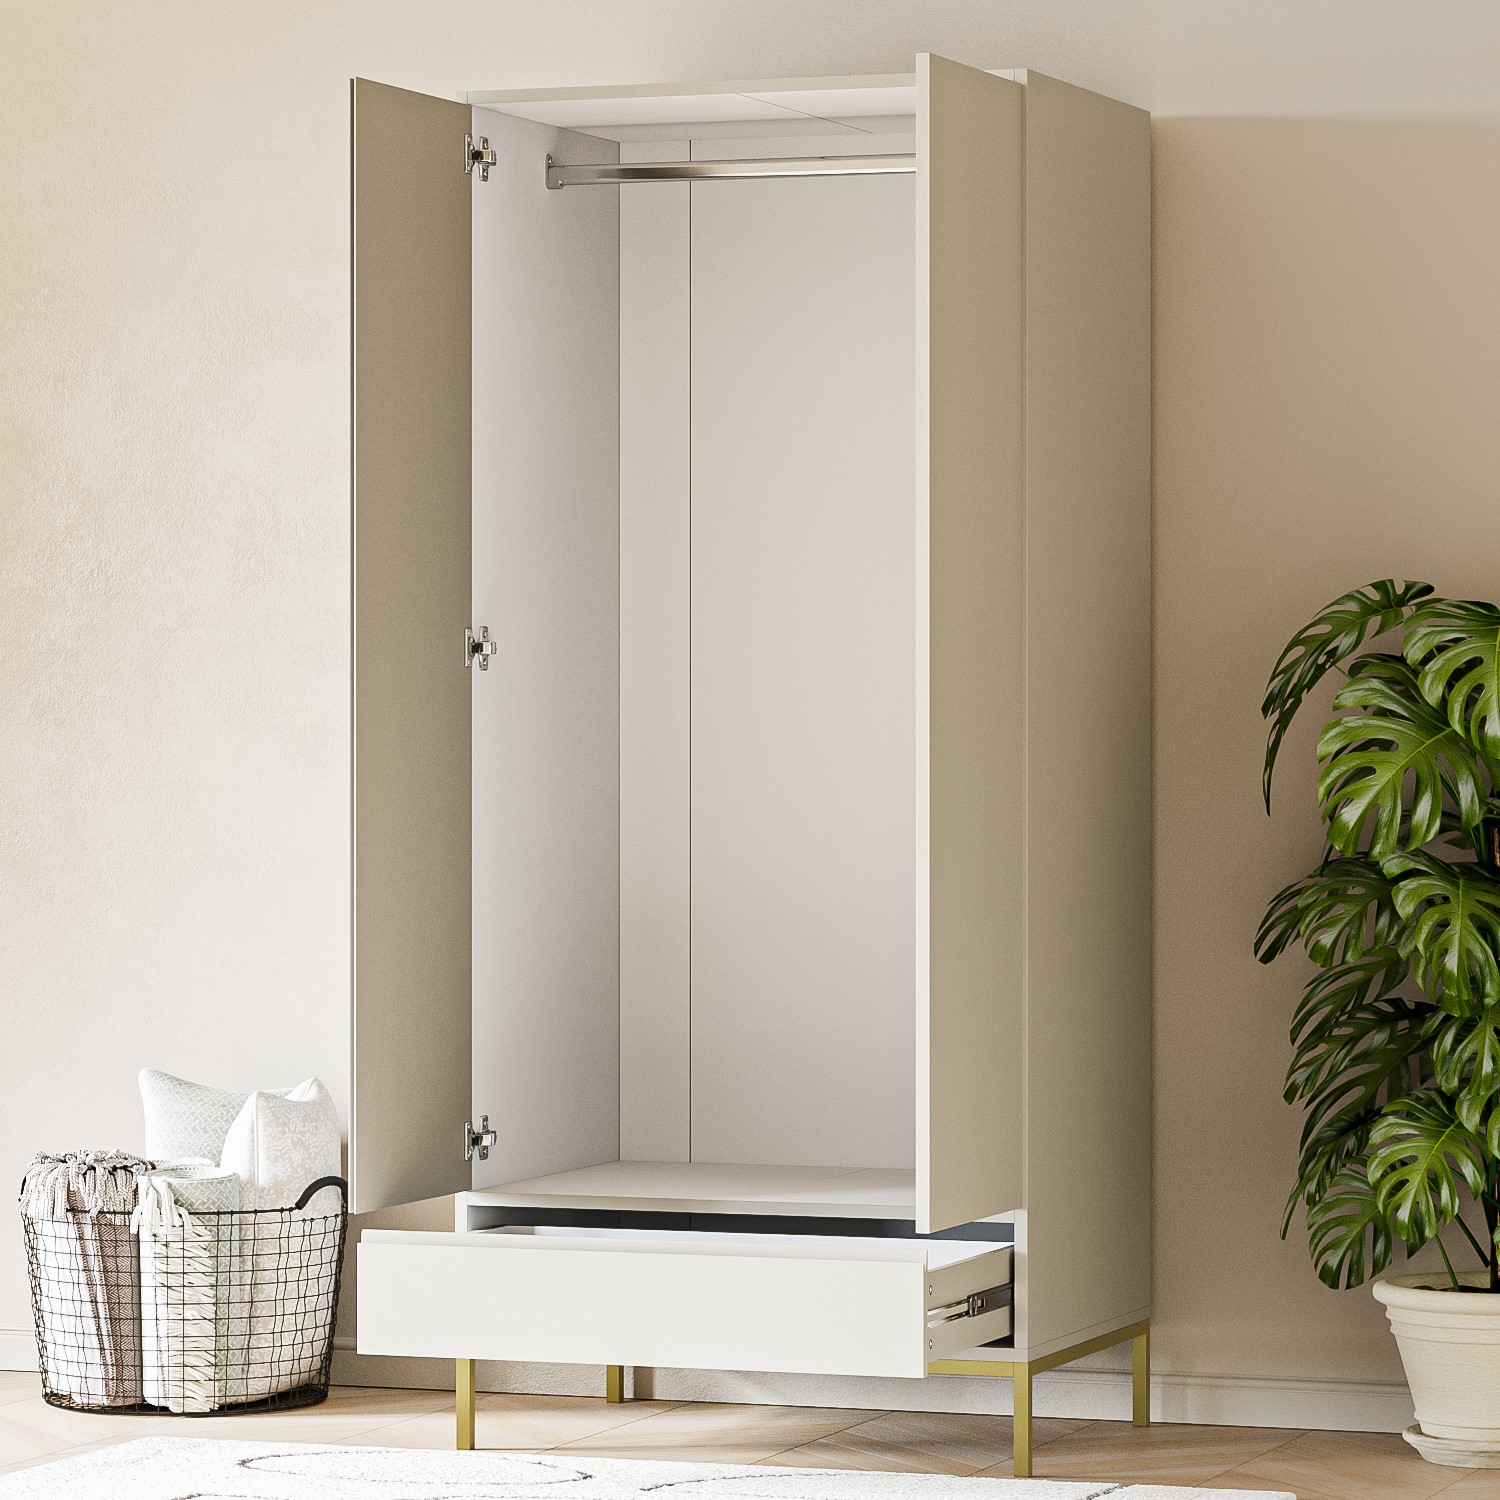 Read more about Modern beige 2 door double wardrobe with drawer